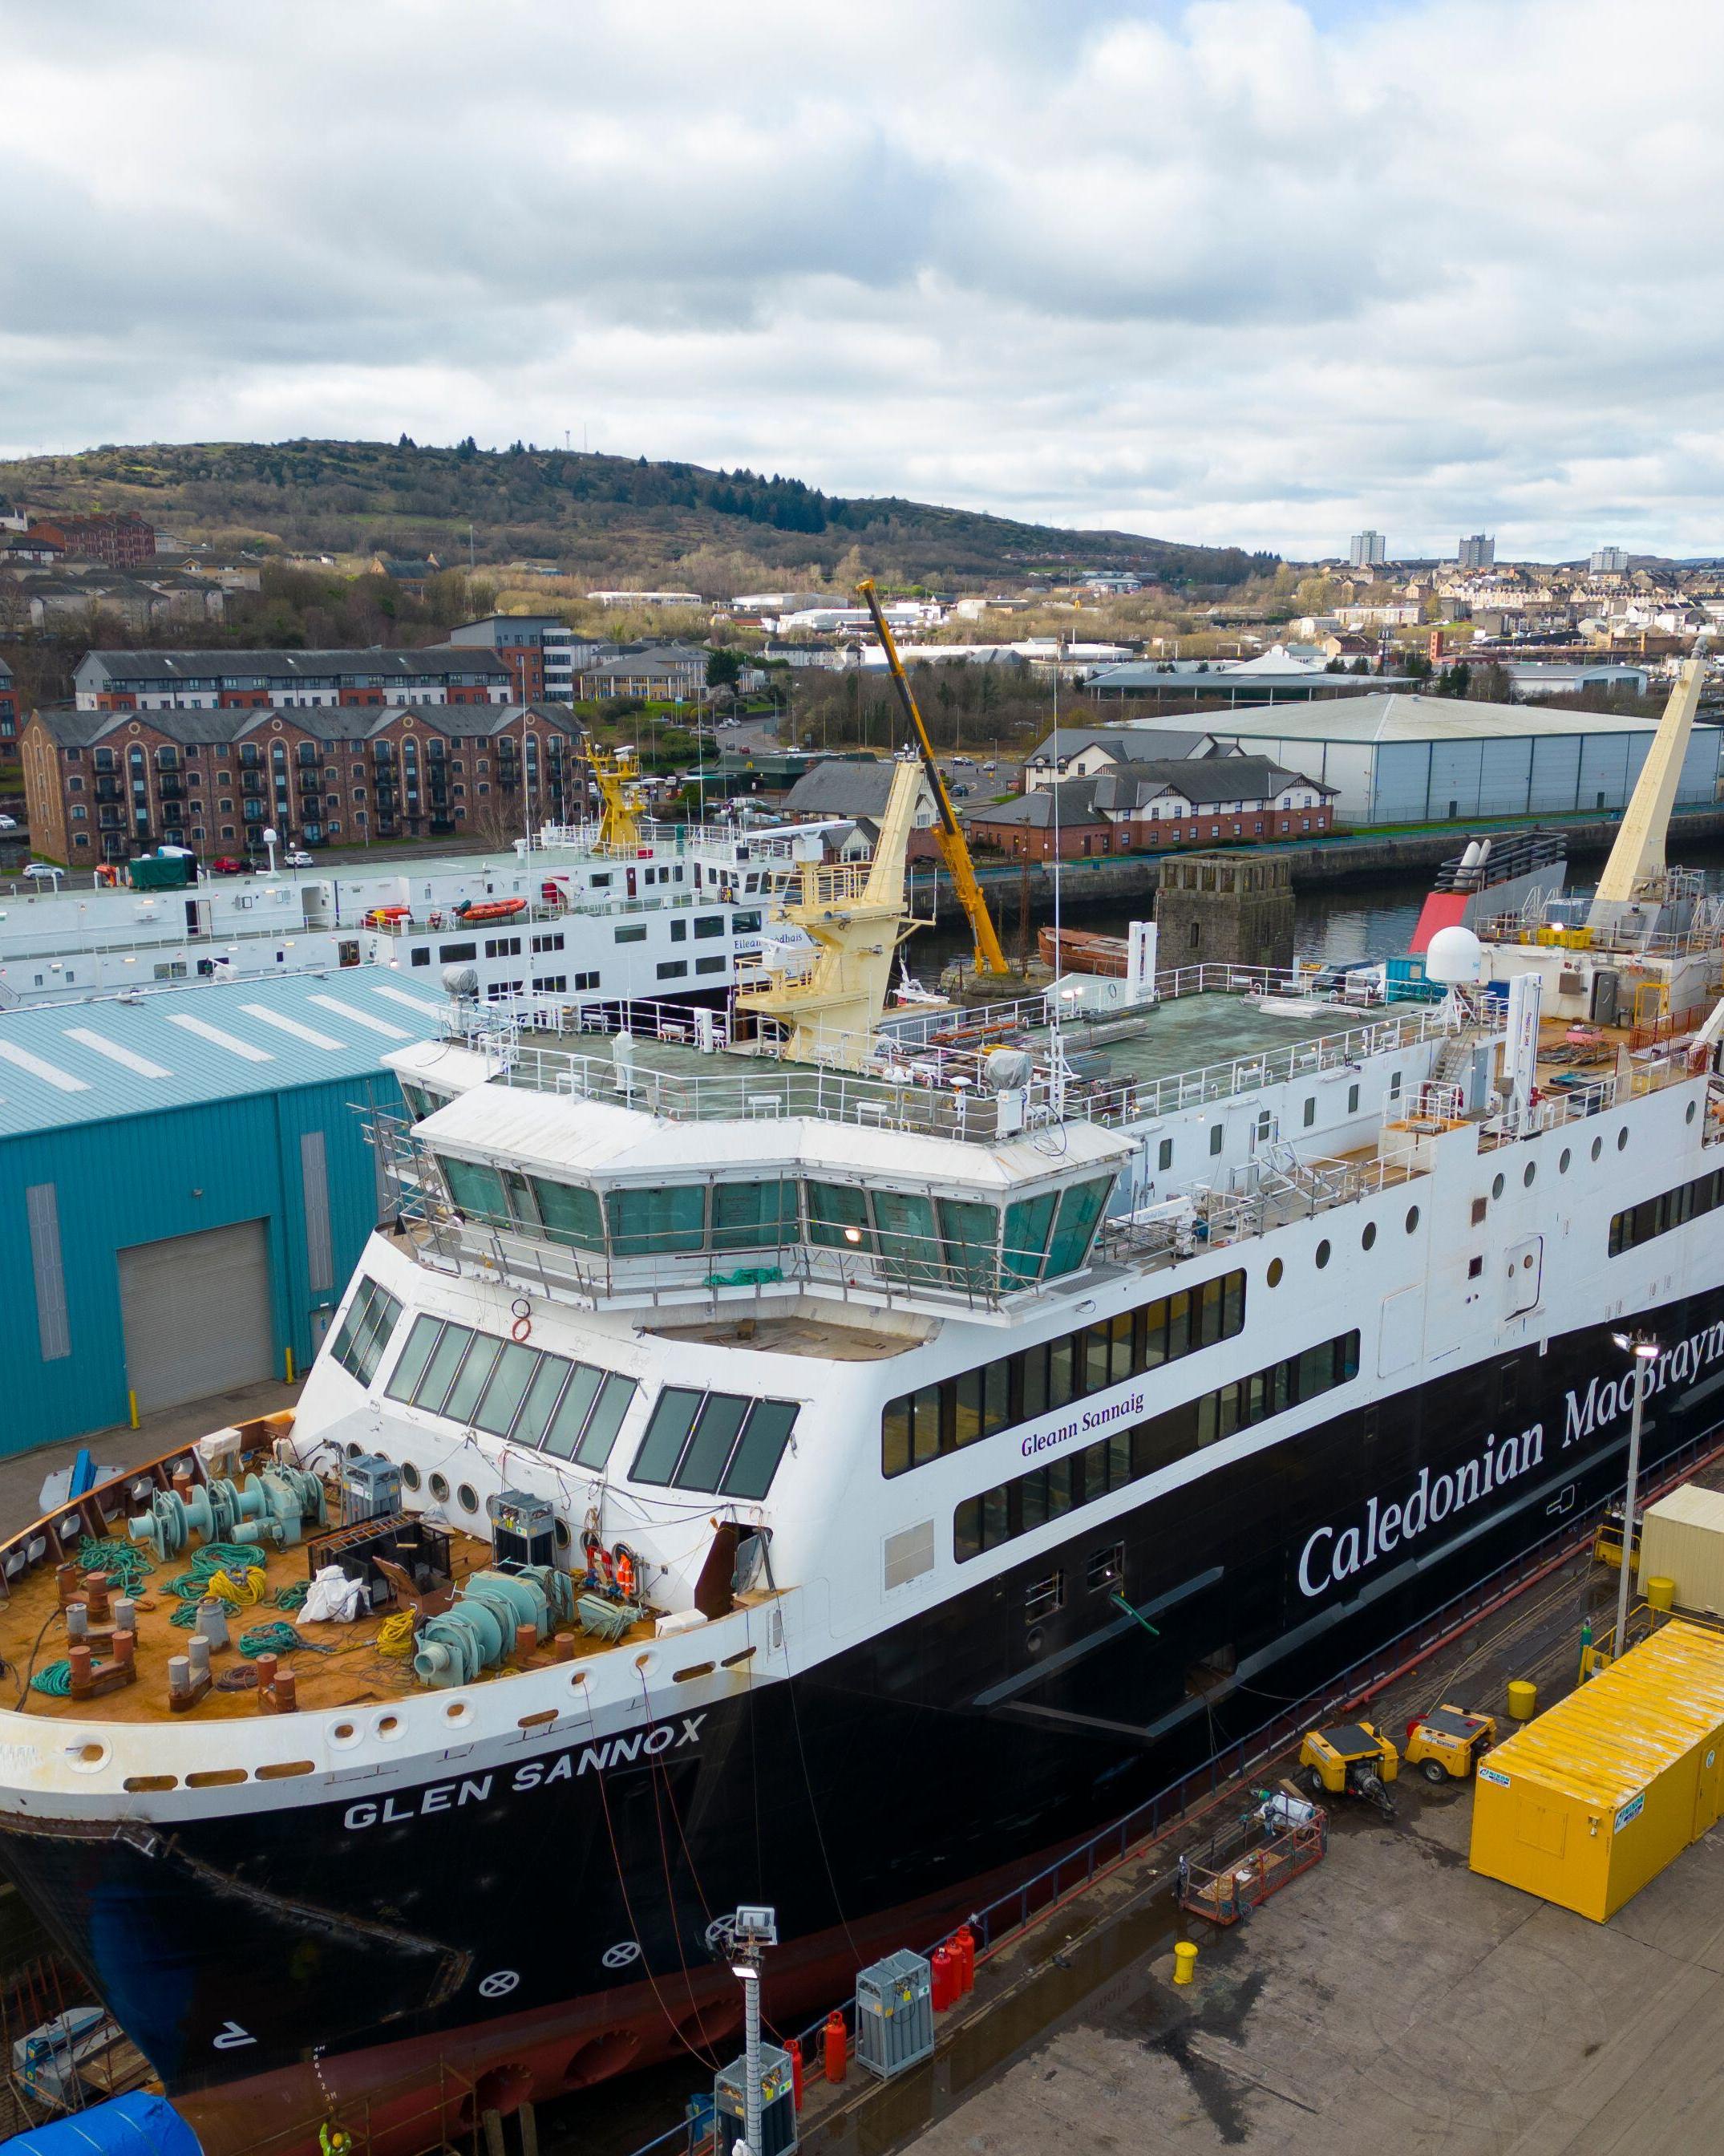 Glen Sannox, a dual fuel ferry, is under construction in Greenock where three other CalMac ferries — Isle of Lewis, Caledonian Isles and Loch Fyne — are in for repairs and maintenance